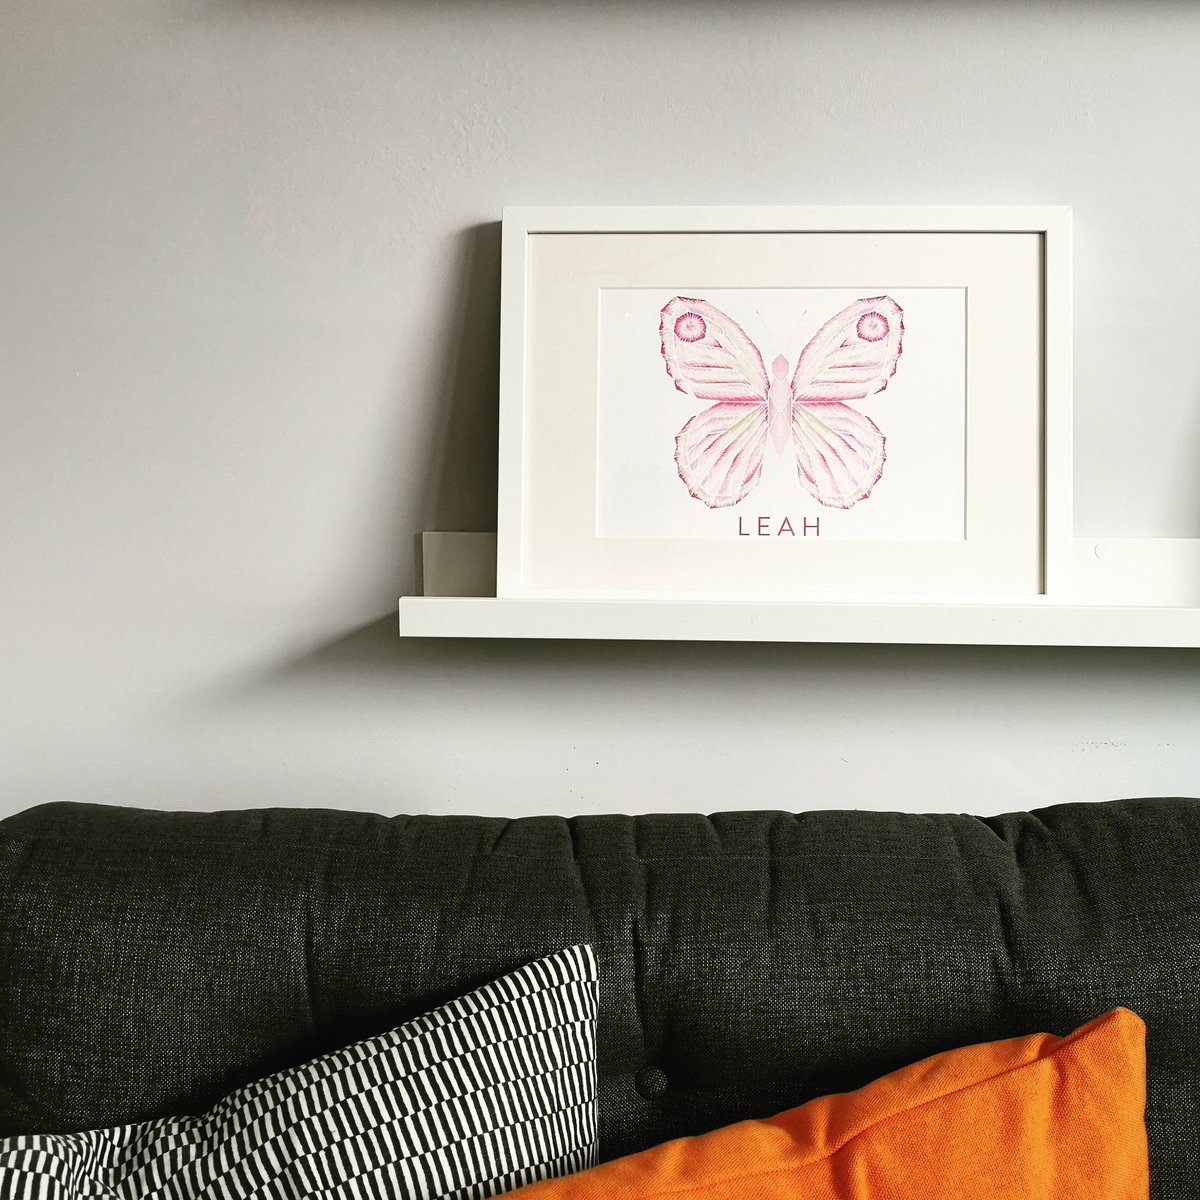 This beautiful personalised butterfly print was recently posted out! The perfect Christening present for a special little girl! #personalisedgift #personalisedprints #pinkbutterfly #butterflyprint #christeninggift #carolinerolesdesign #carolinesdesigns #LUKH  @shophandmadeuk